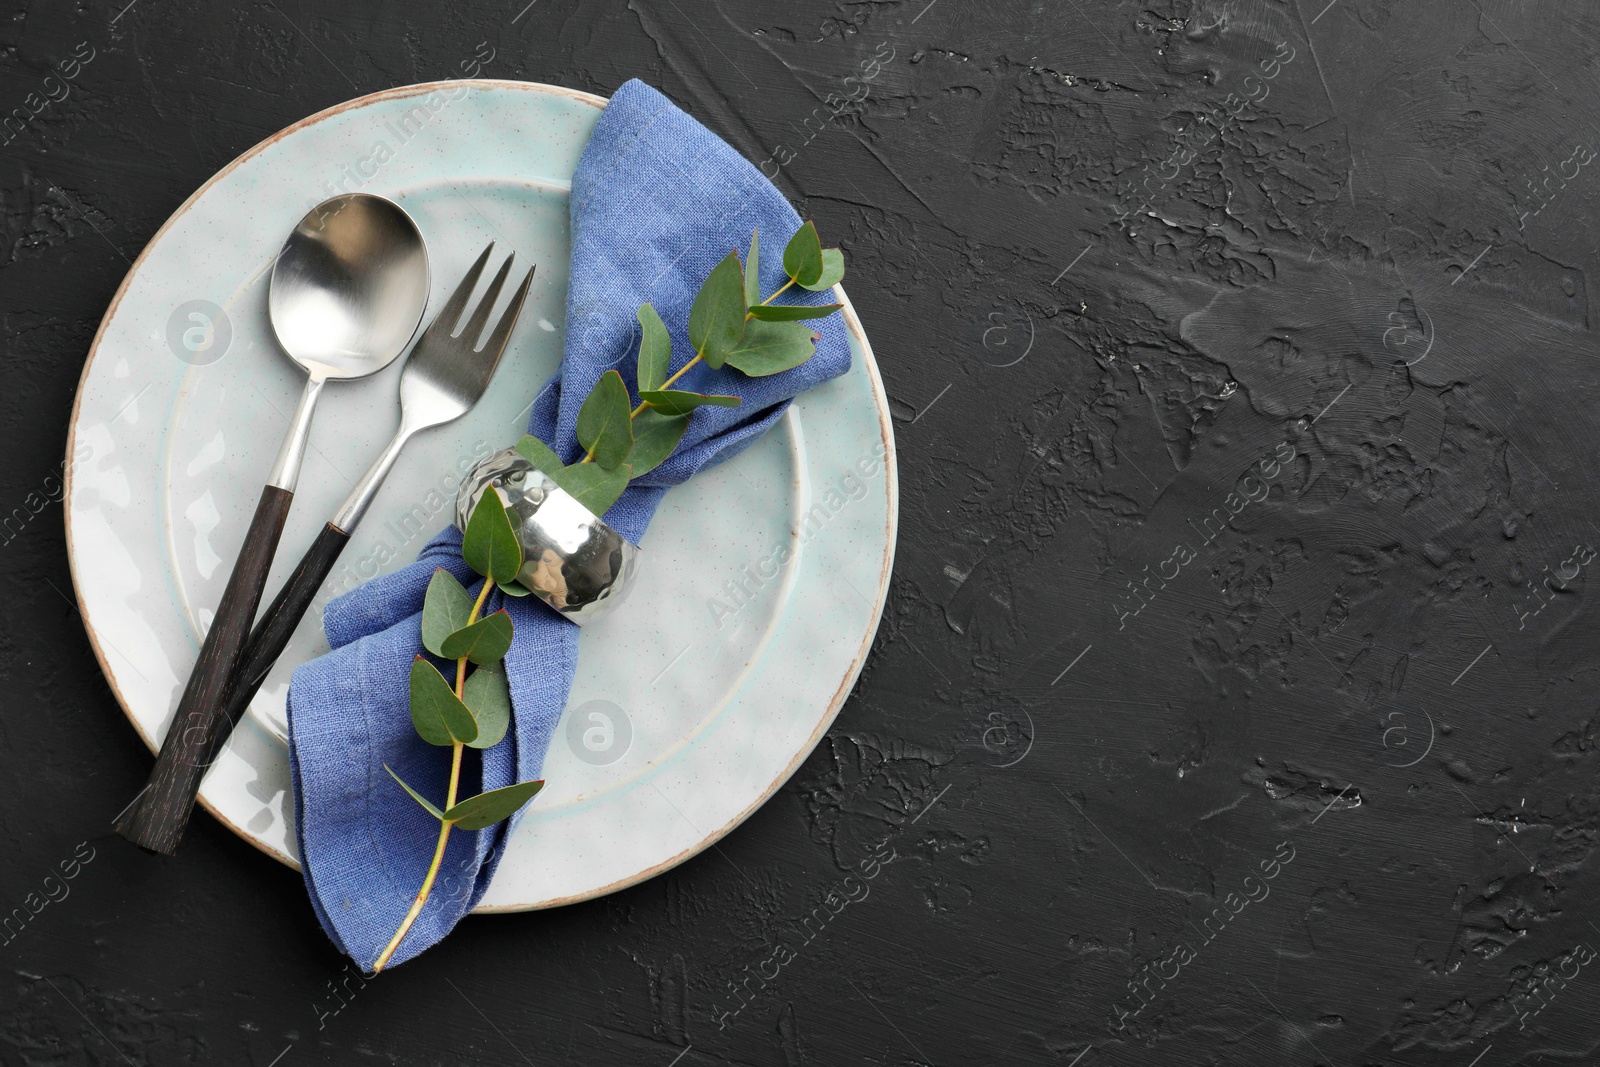 Photo of Stylish setting with cutlery, eucalyptus branch, napkin and plate on dark textured table, top view. Space for text